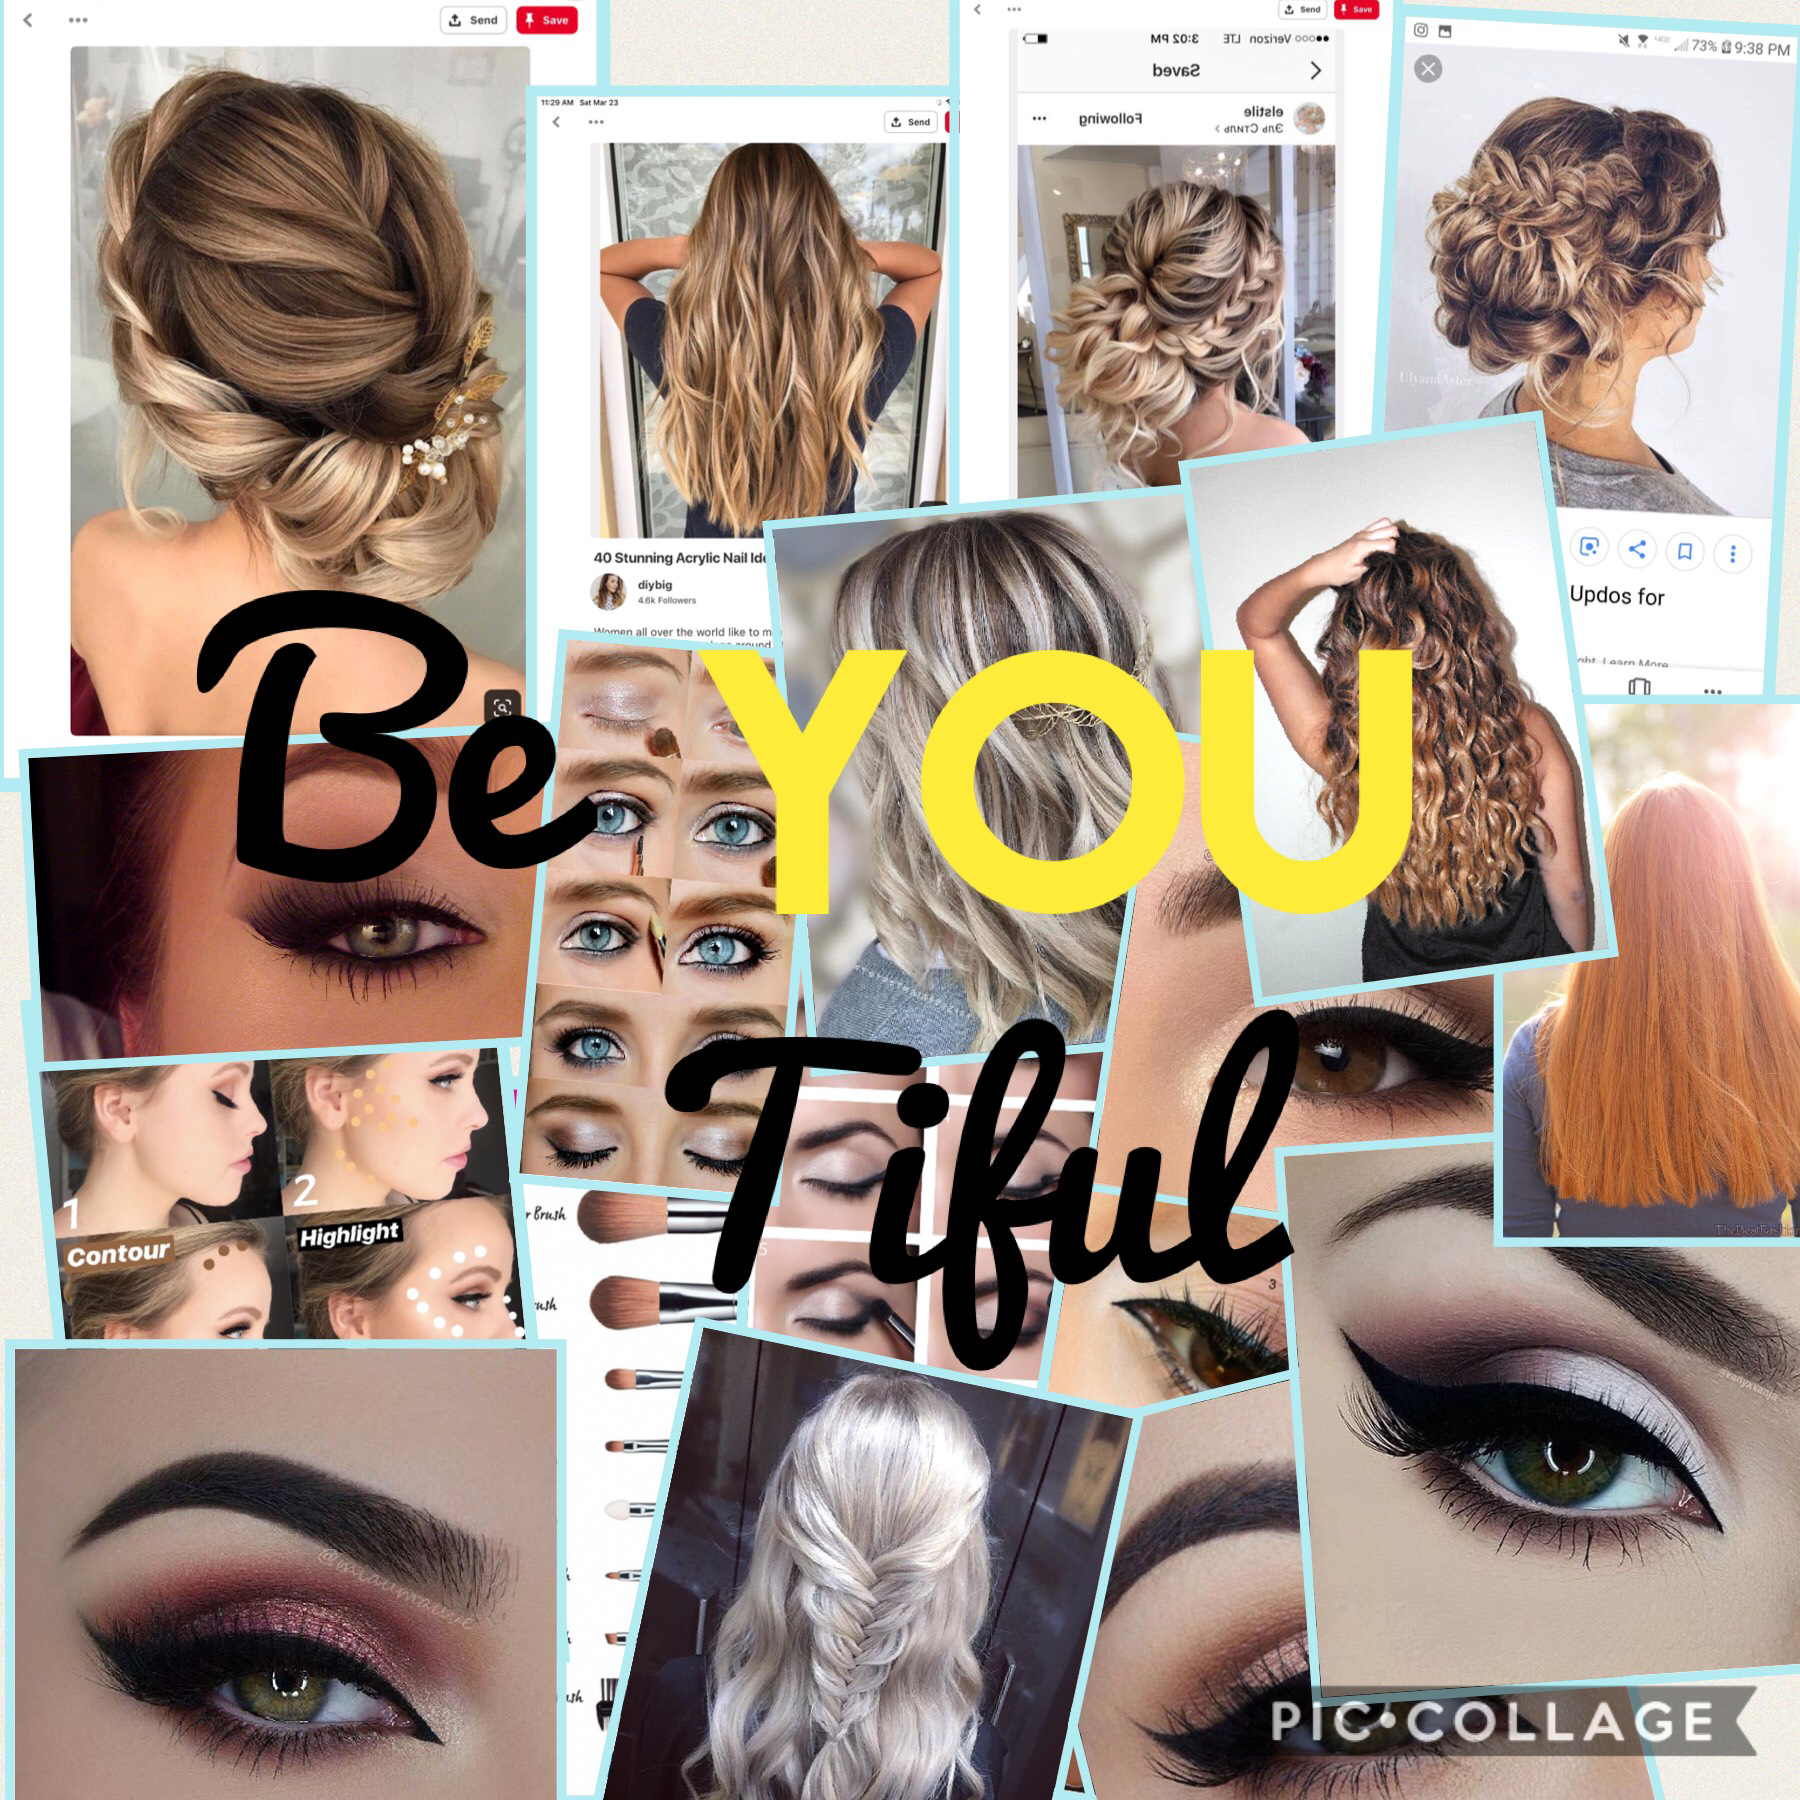 Be You Tiful
Love 
Comment 
Share 
Remix 